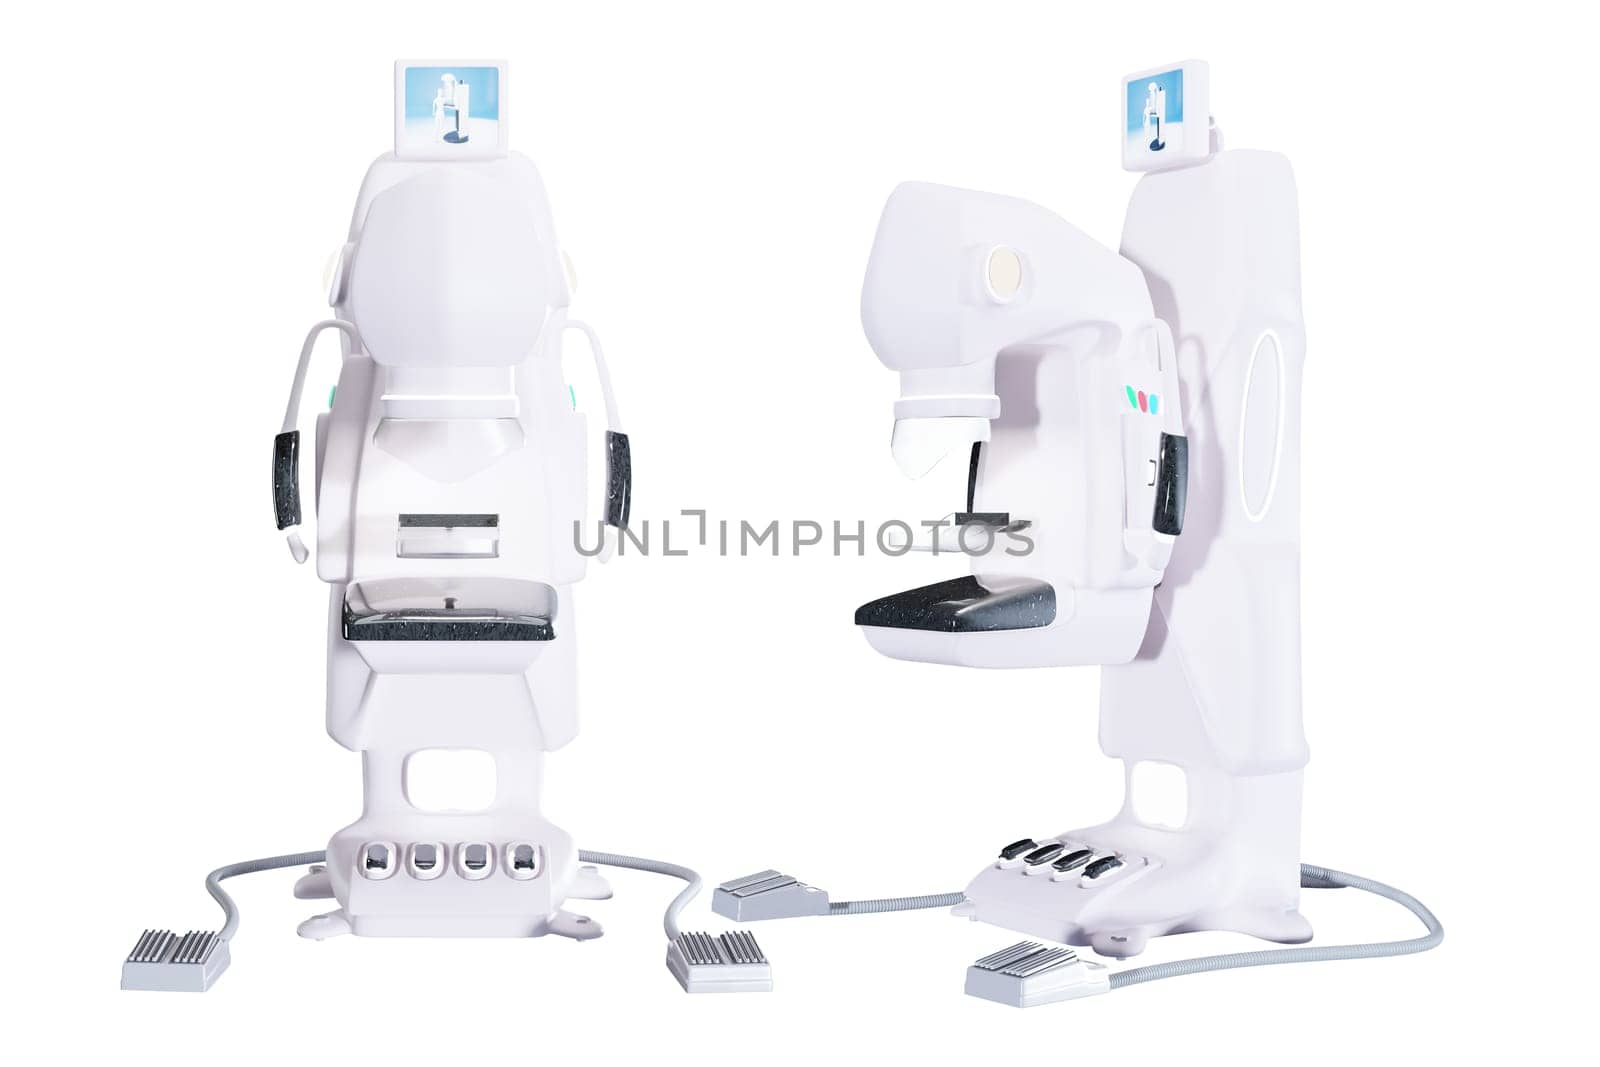 Mammogram device 3D rendering top view  for screening breast cancer in hospital on white background. Clipping path.